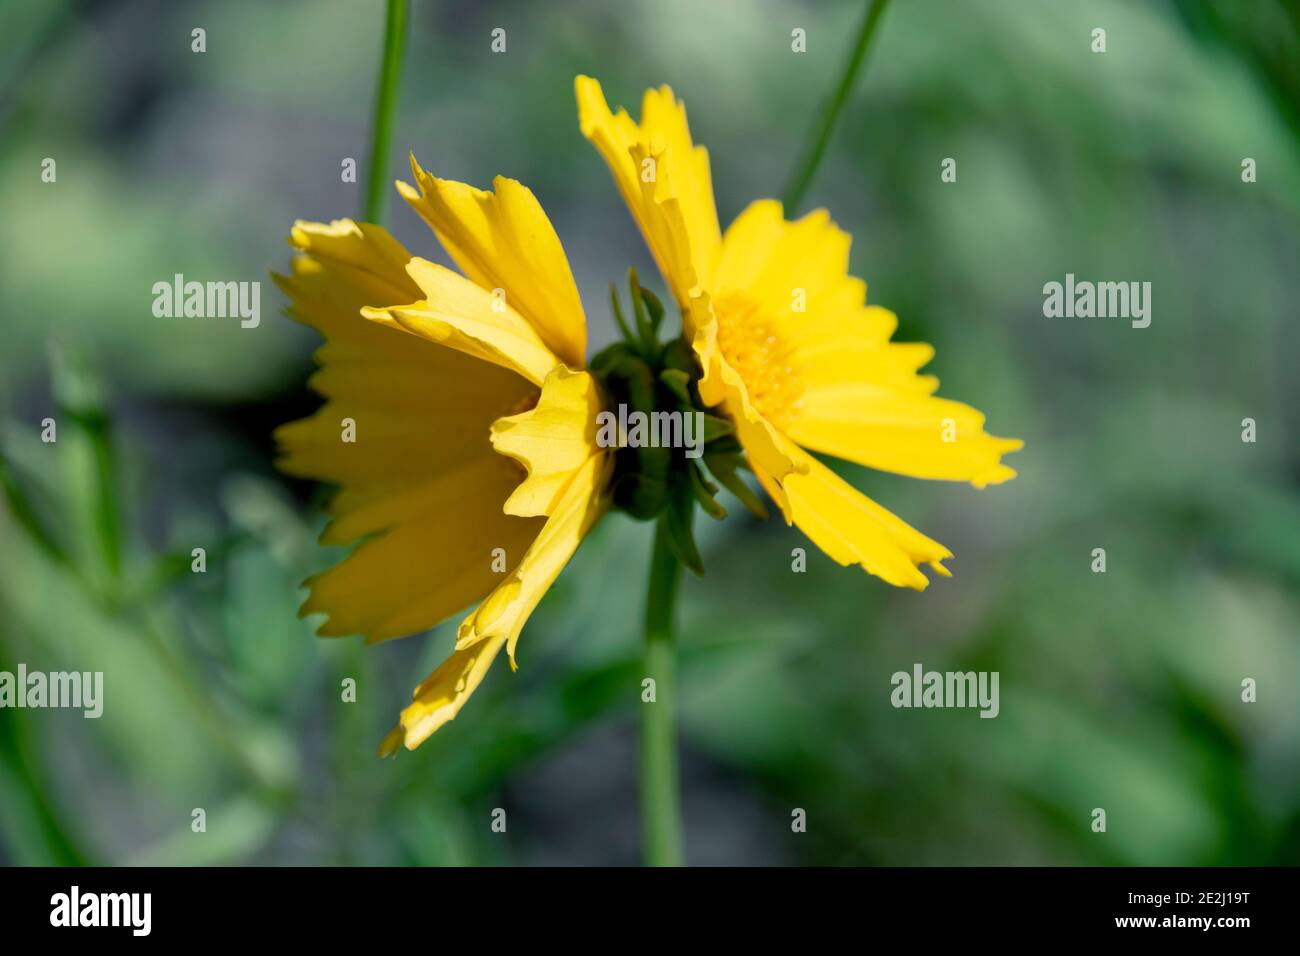 Coreopsis lanceolate has thrown two flowers on one stem against the background of summer greenery. Stock Photo